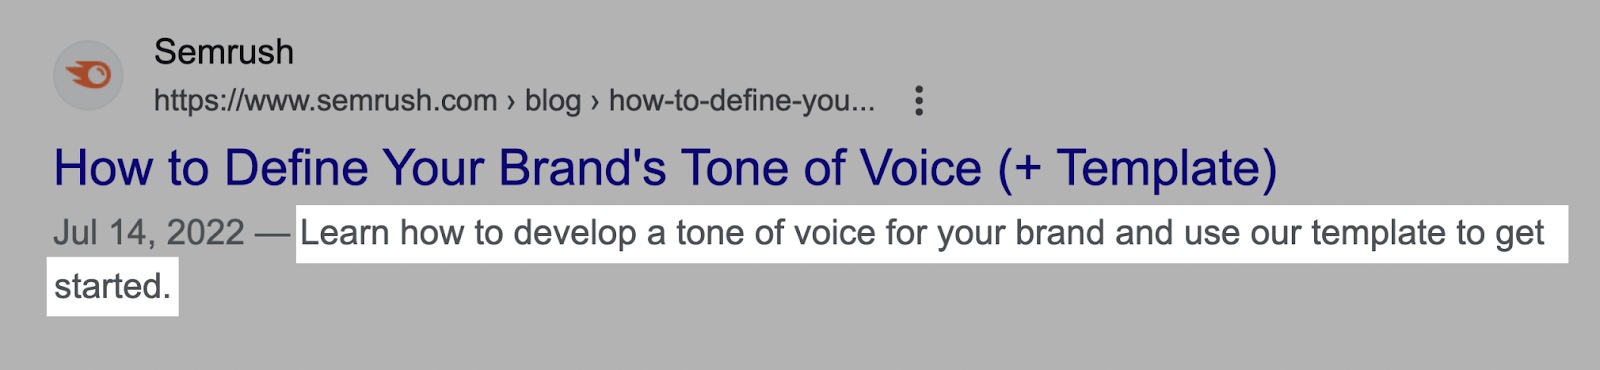 An example of meta description from Semrush on Google SERP "Learn how to develop a tone of voice for your brand and use our template to get started."